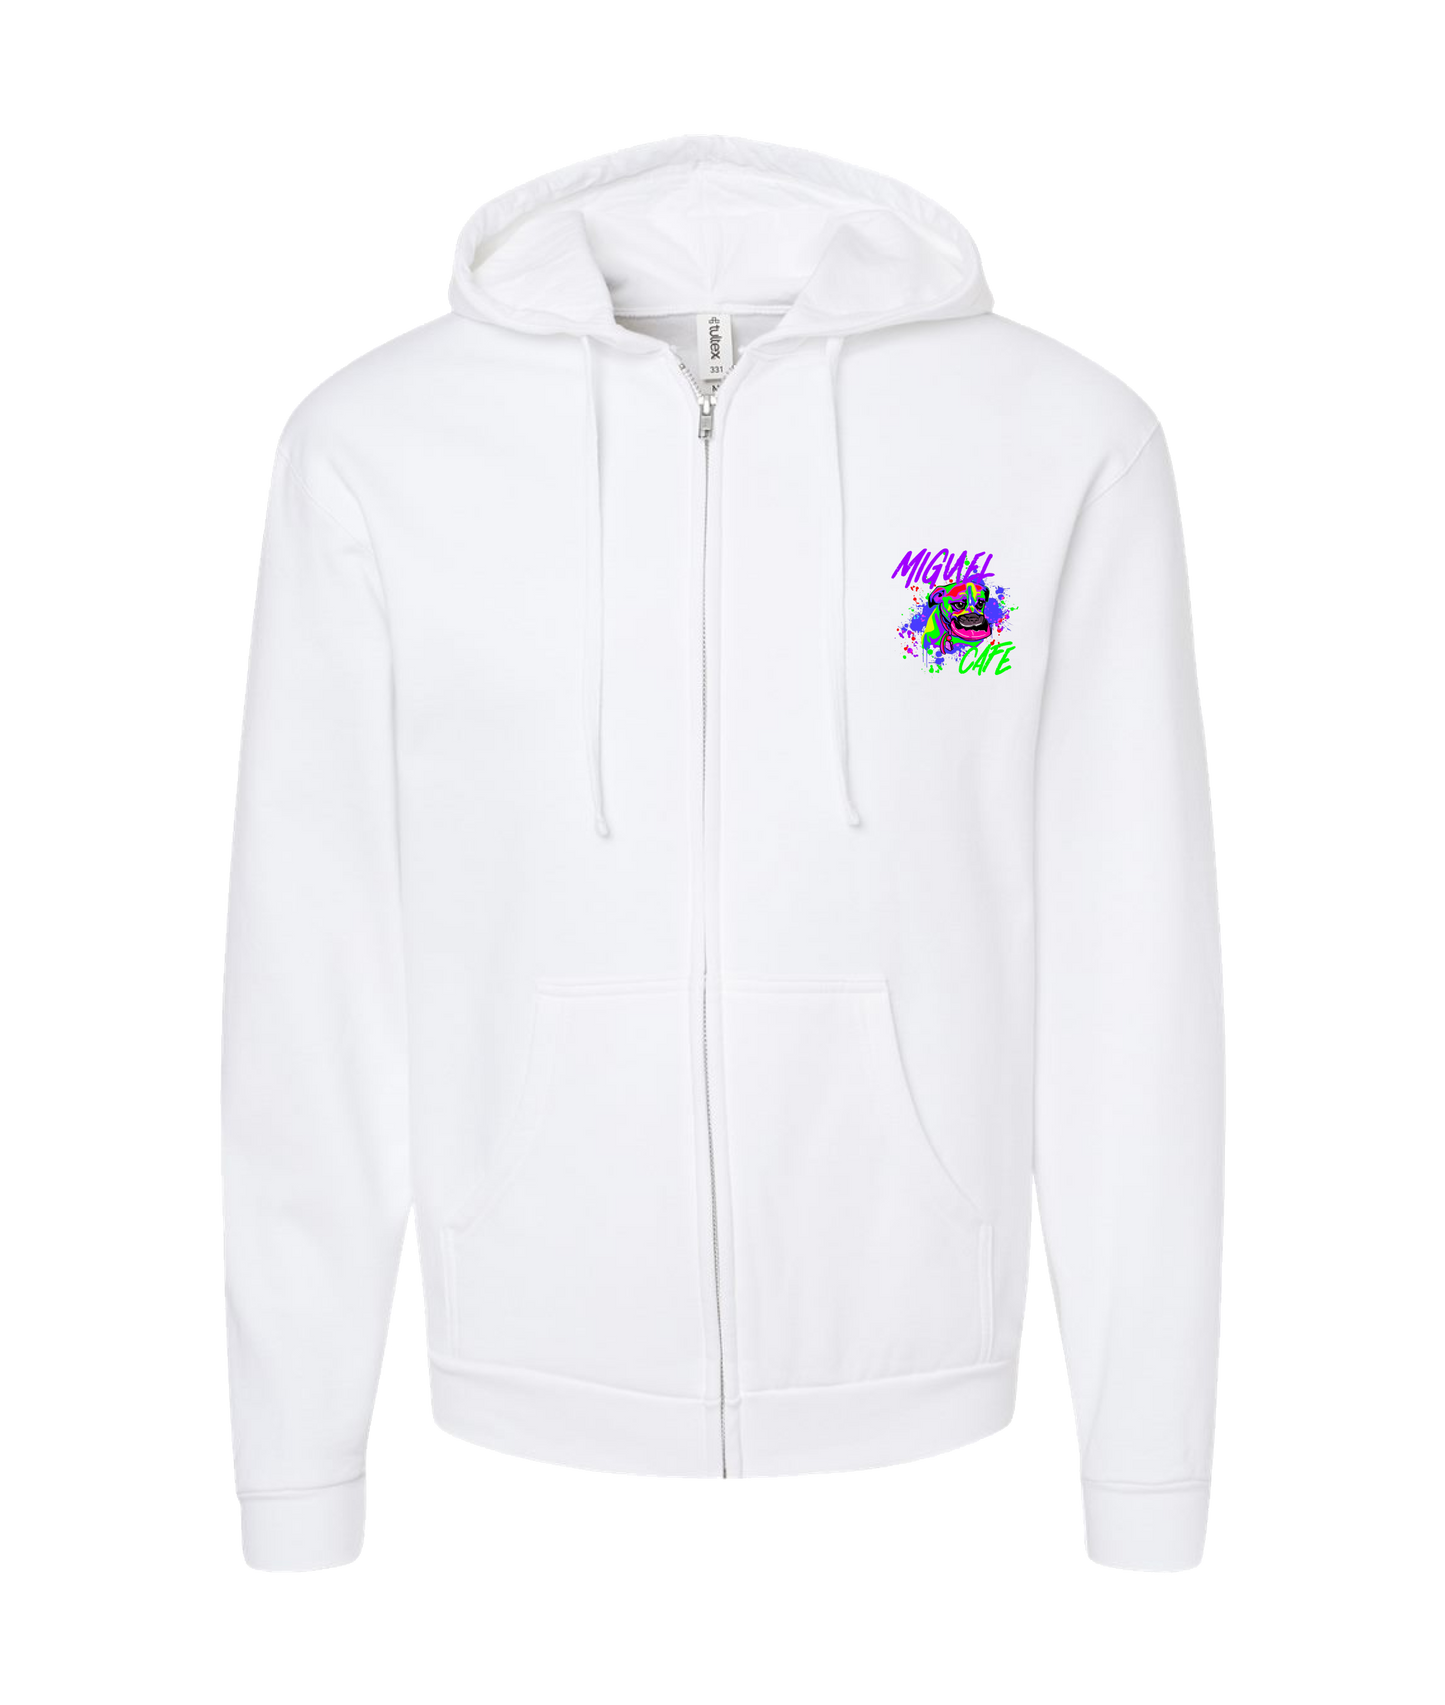 Miguel Cafe music - DOG - White Zip Up Hoodie